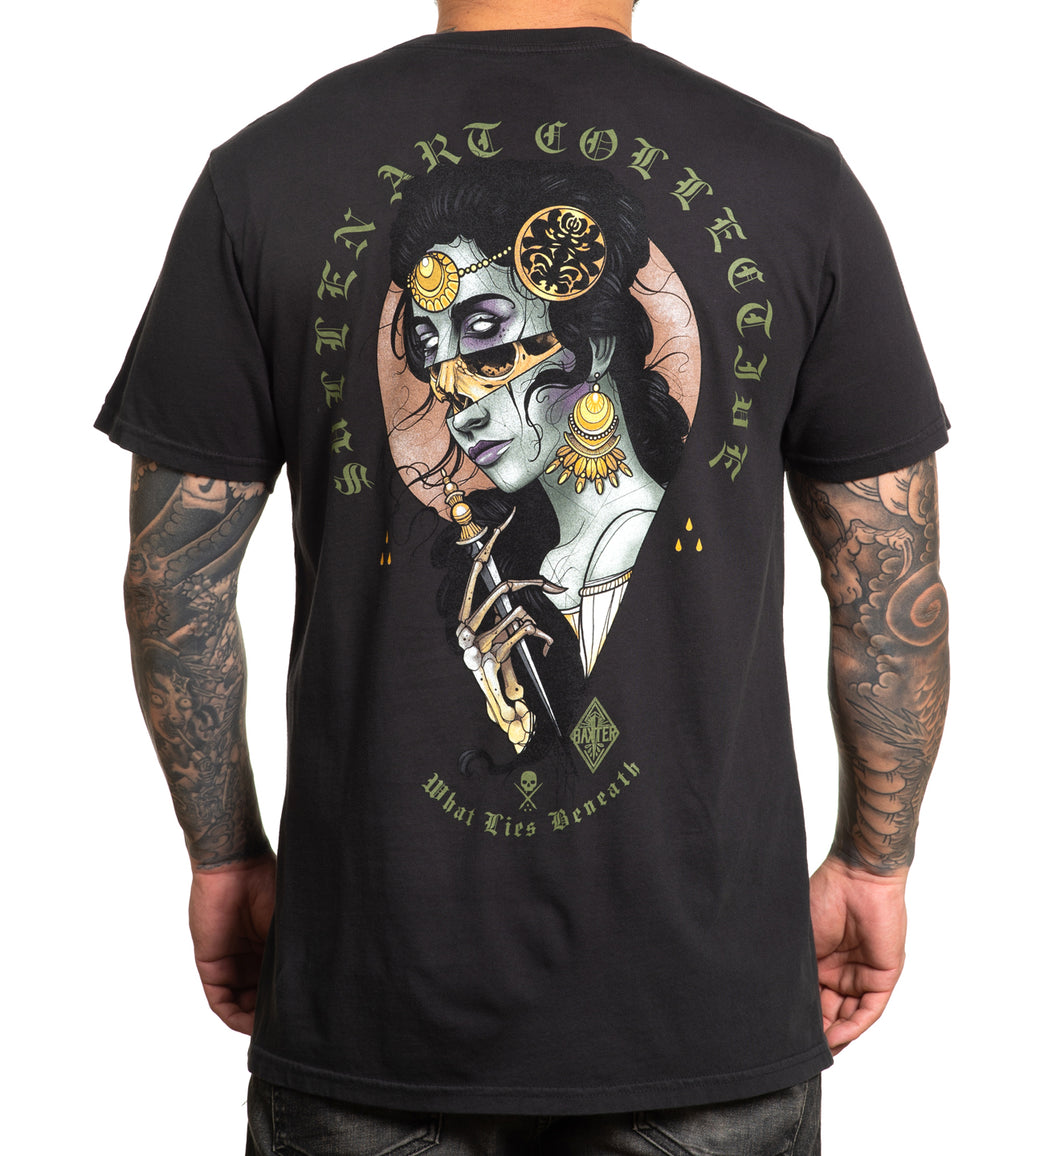 black premium tshirt with undead woman skeleton by Baxter